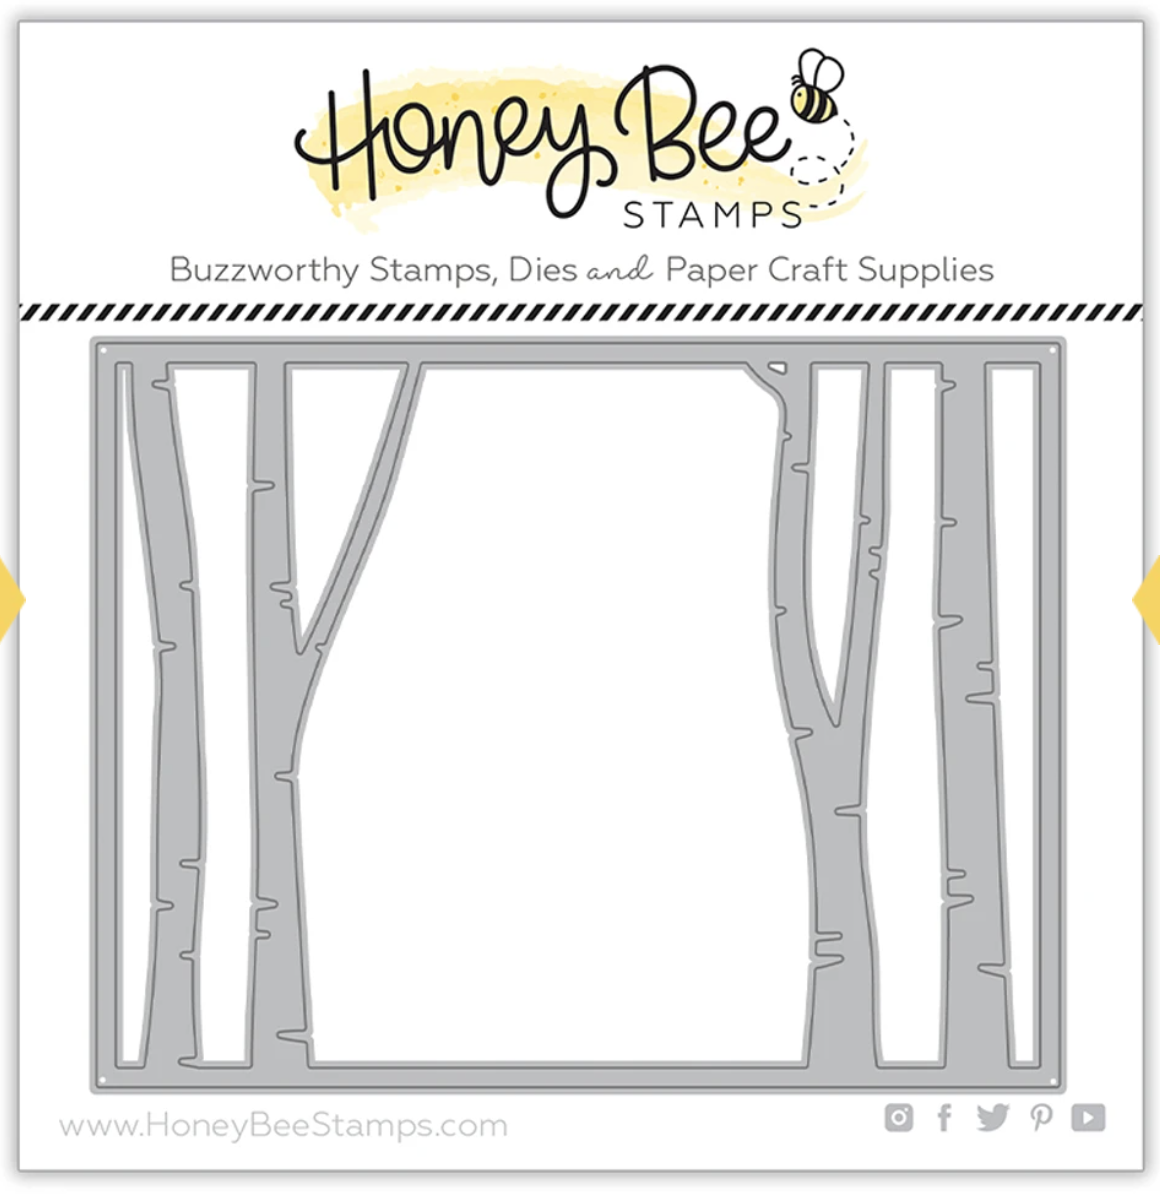 Honeybee Stamps, Birch A2 Cover Plate - Top